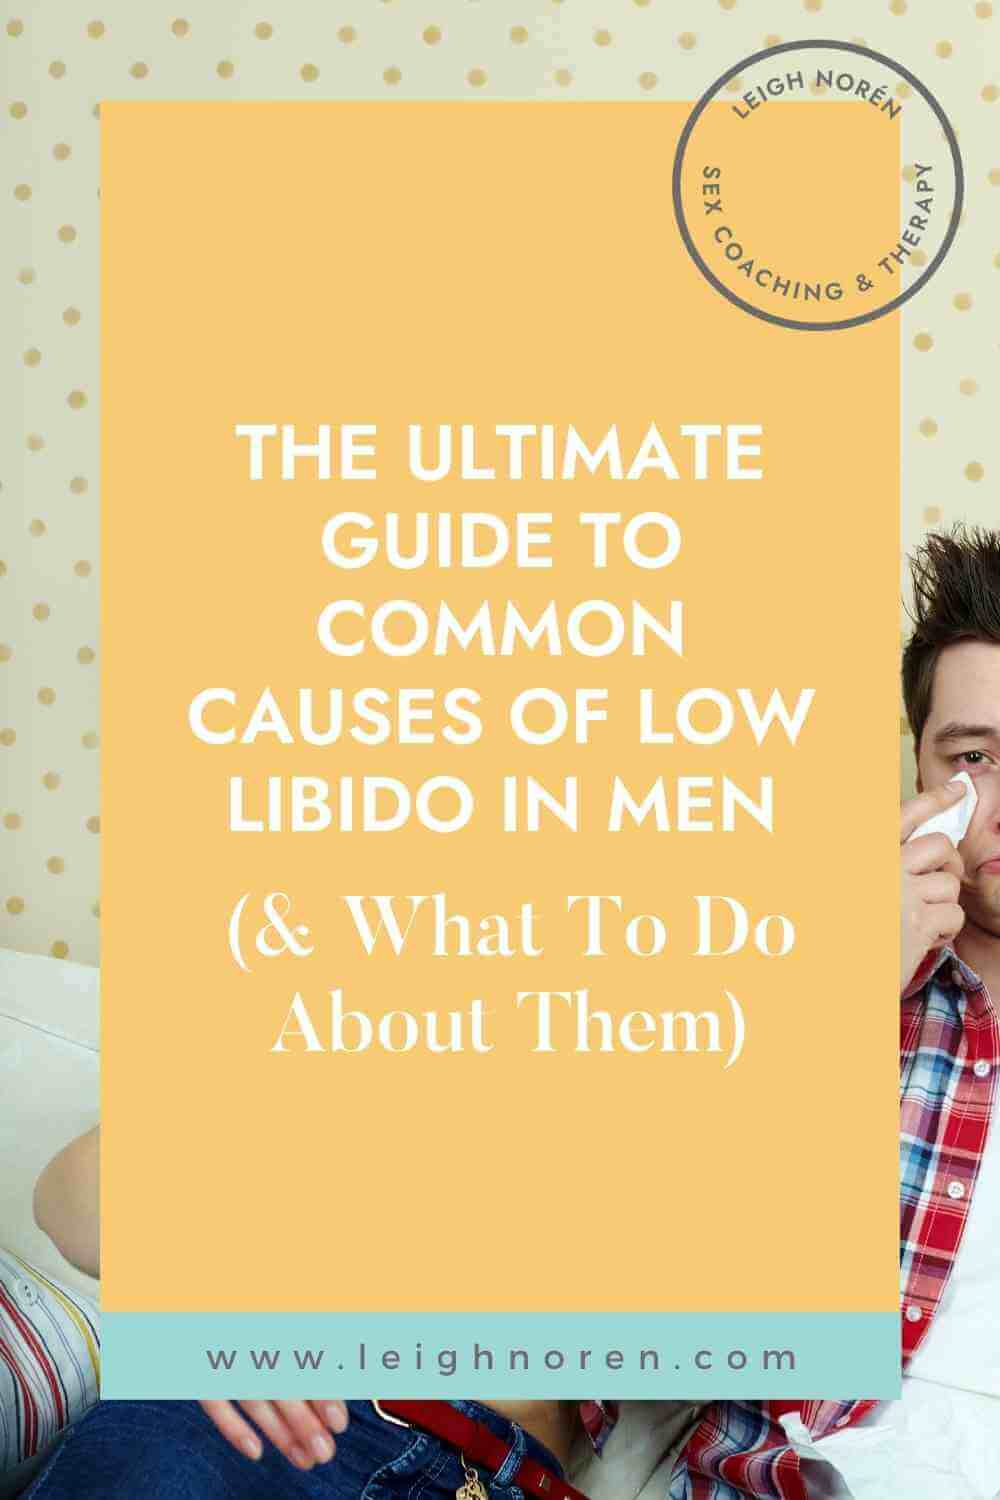 The Ultimate Guide To Common Causes Of Low Libido In Men (& What To Do About Them)